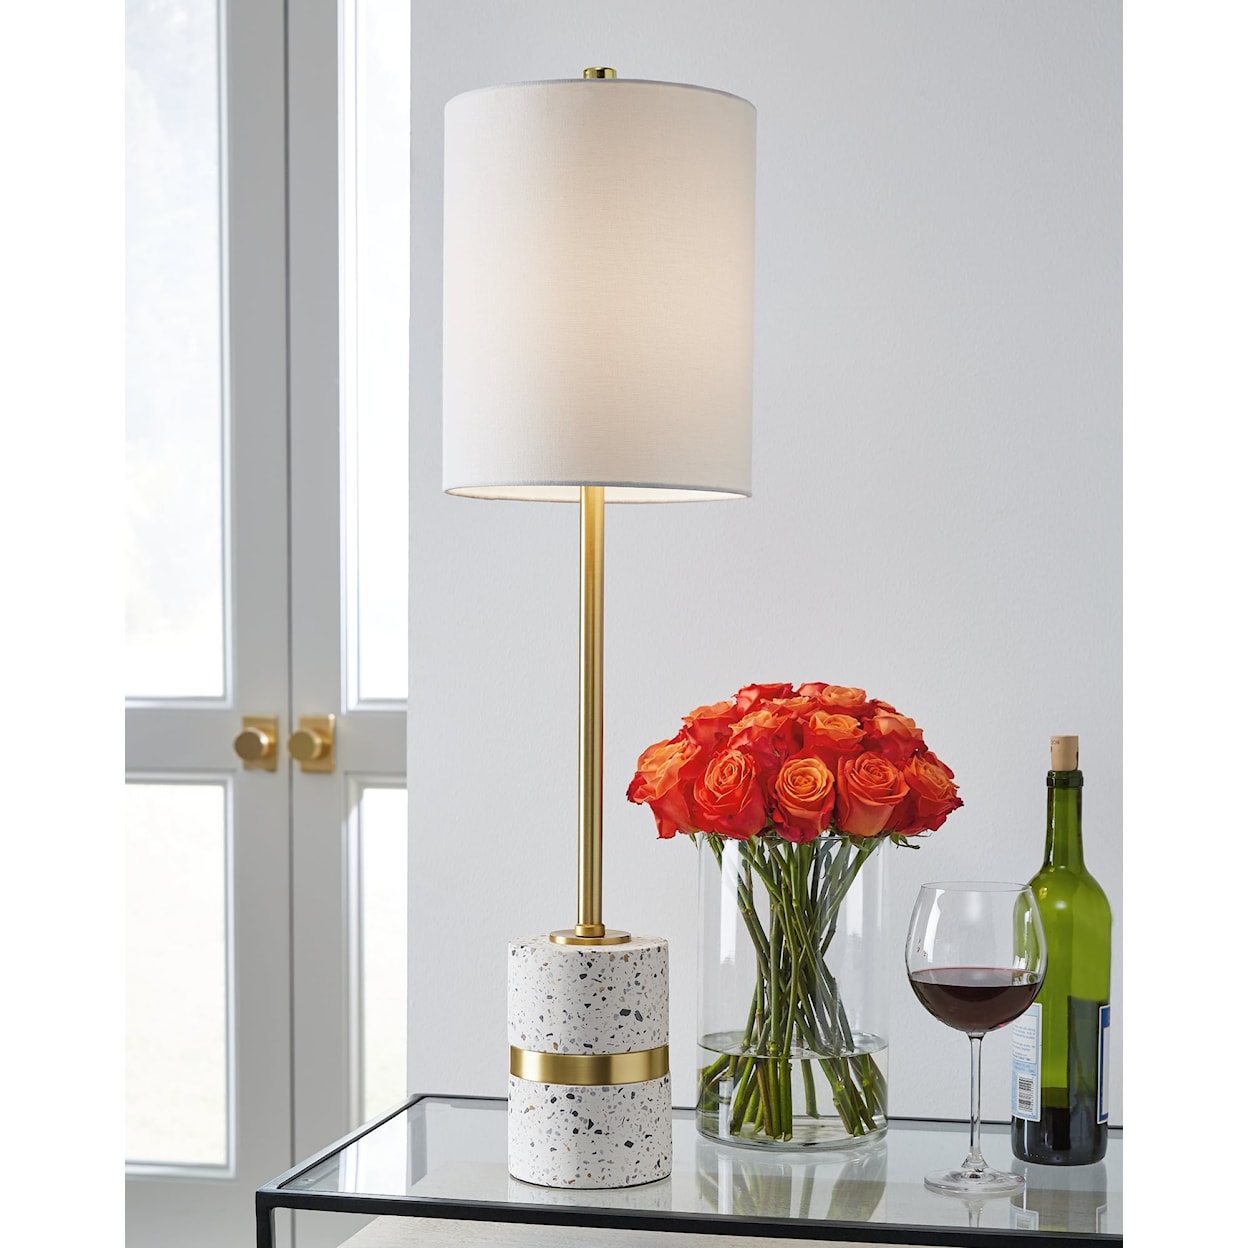 Signature Design by Ashley Maywick Table Lamp